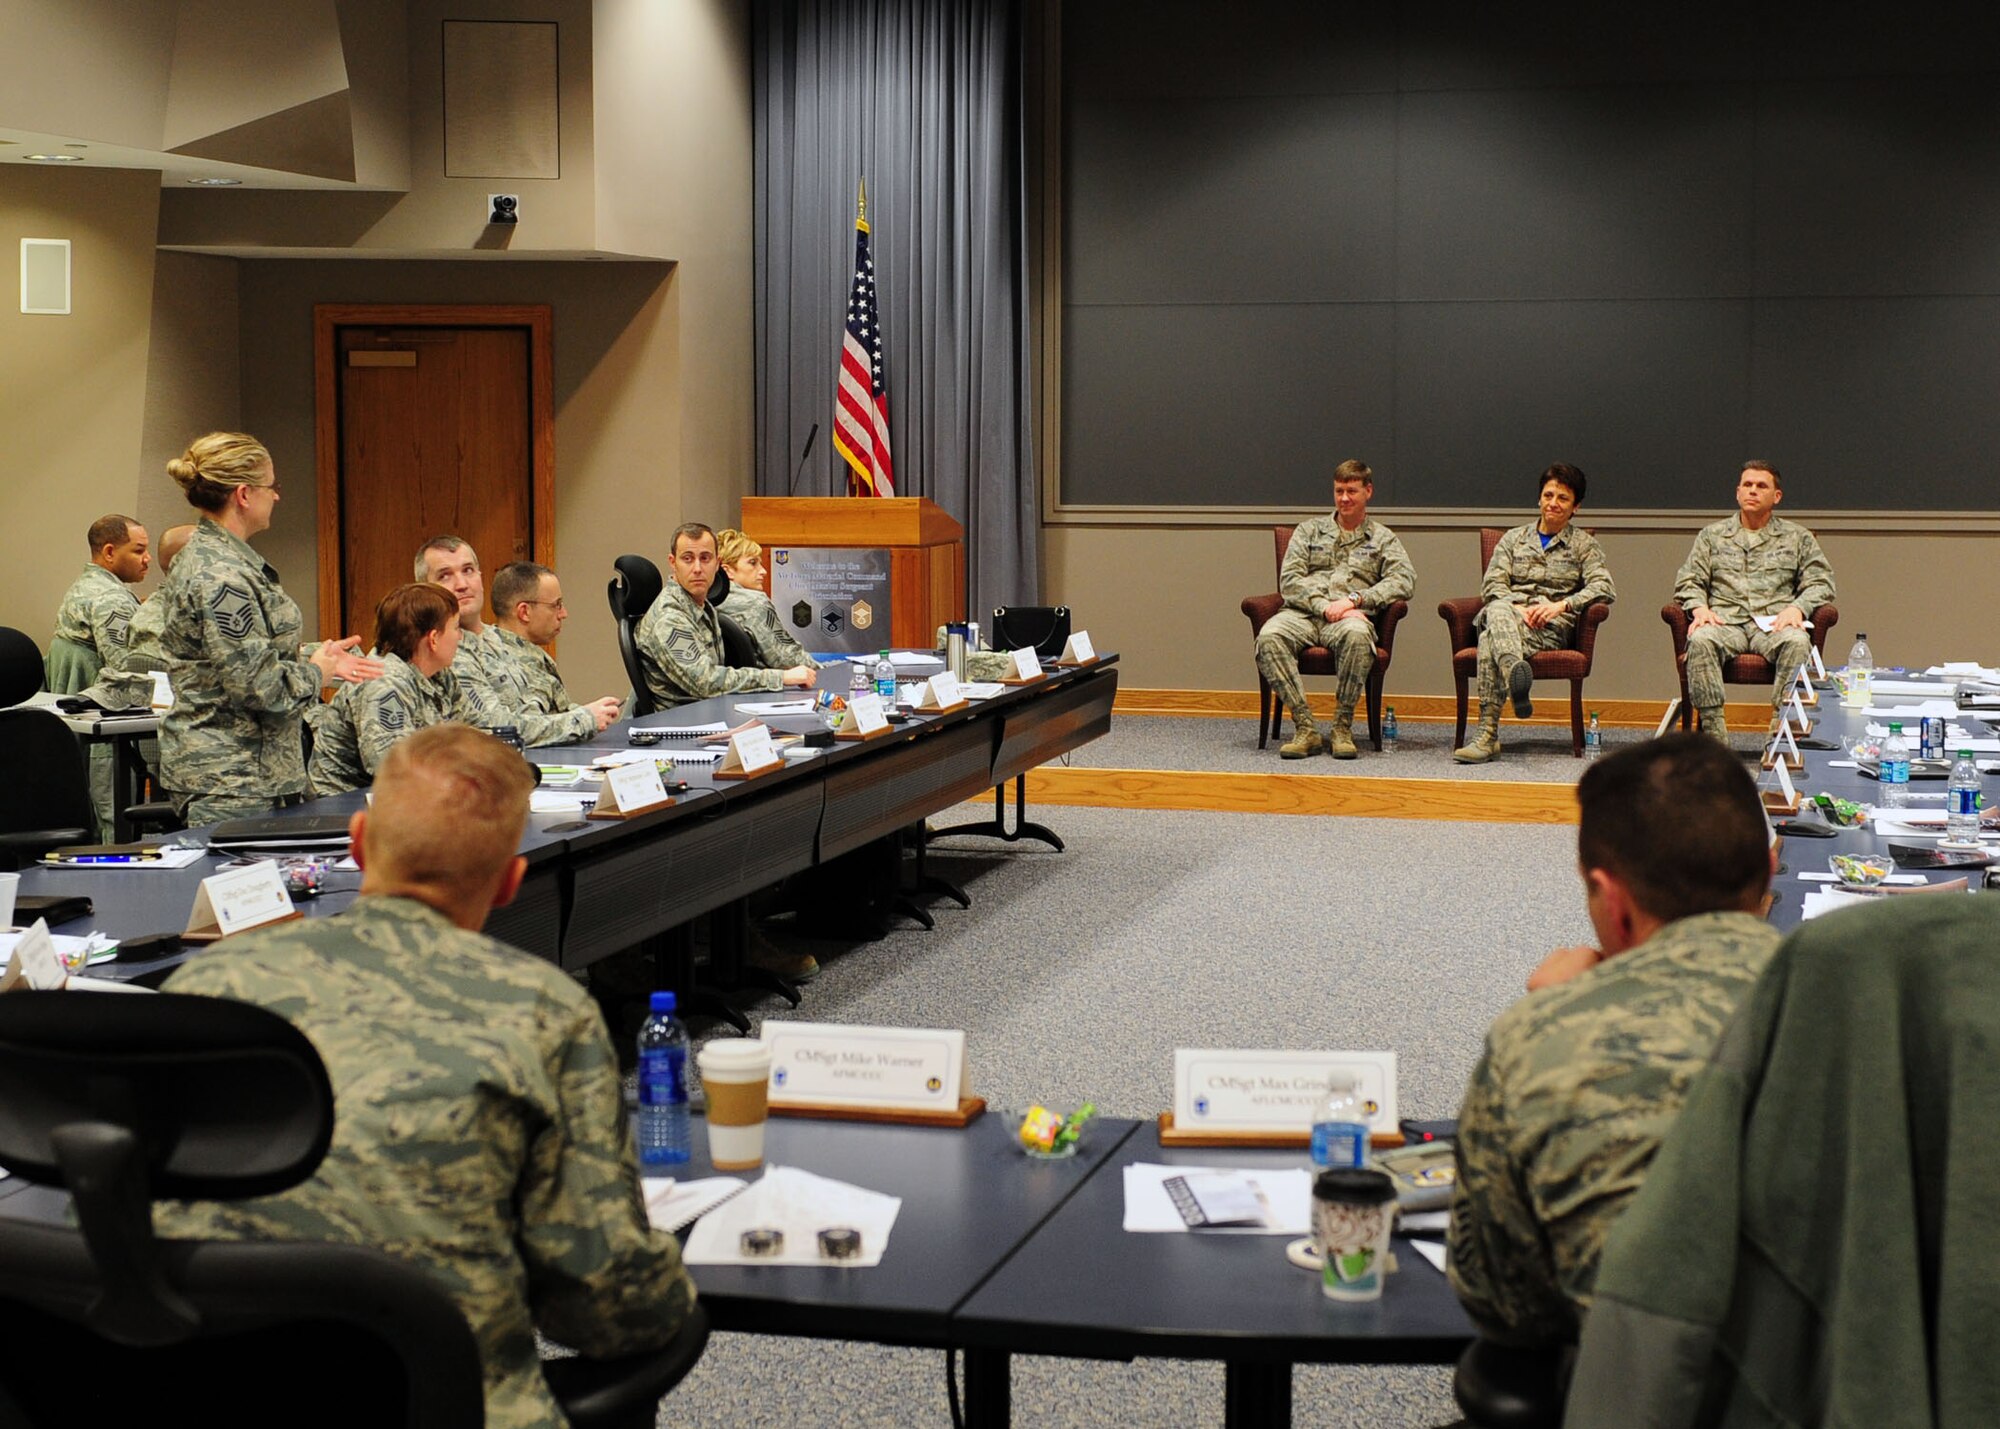 Brig. Gen. William Thornton, Air Force Materiel Command director of Air, Space and Information Operations; Col. Cassie Barlow, 88th Air Base Wing commander; and Col. Steven Bleymaier, Air Force Materiel Command deputy director of logistics, answer questions at the Wing Commander Panel during the 2014 AFMC Chiefs' Orientation. (U.S. Air Force photo/Senior Airman James Jacobs)